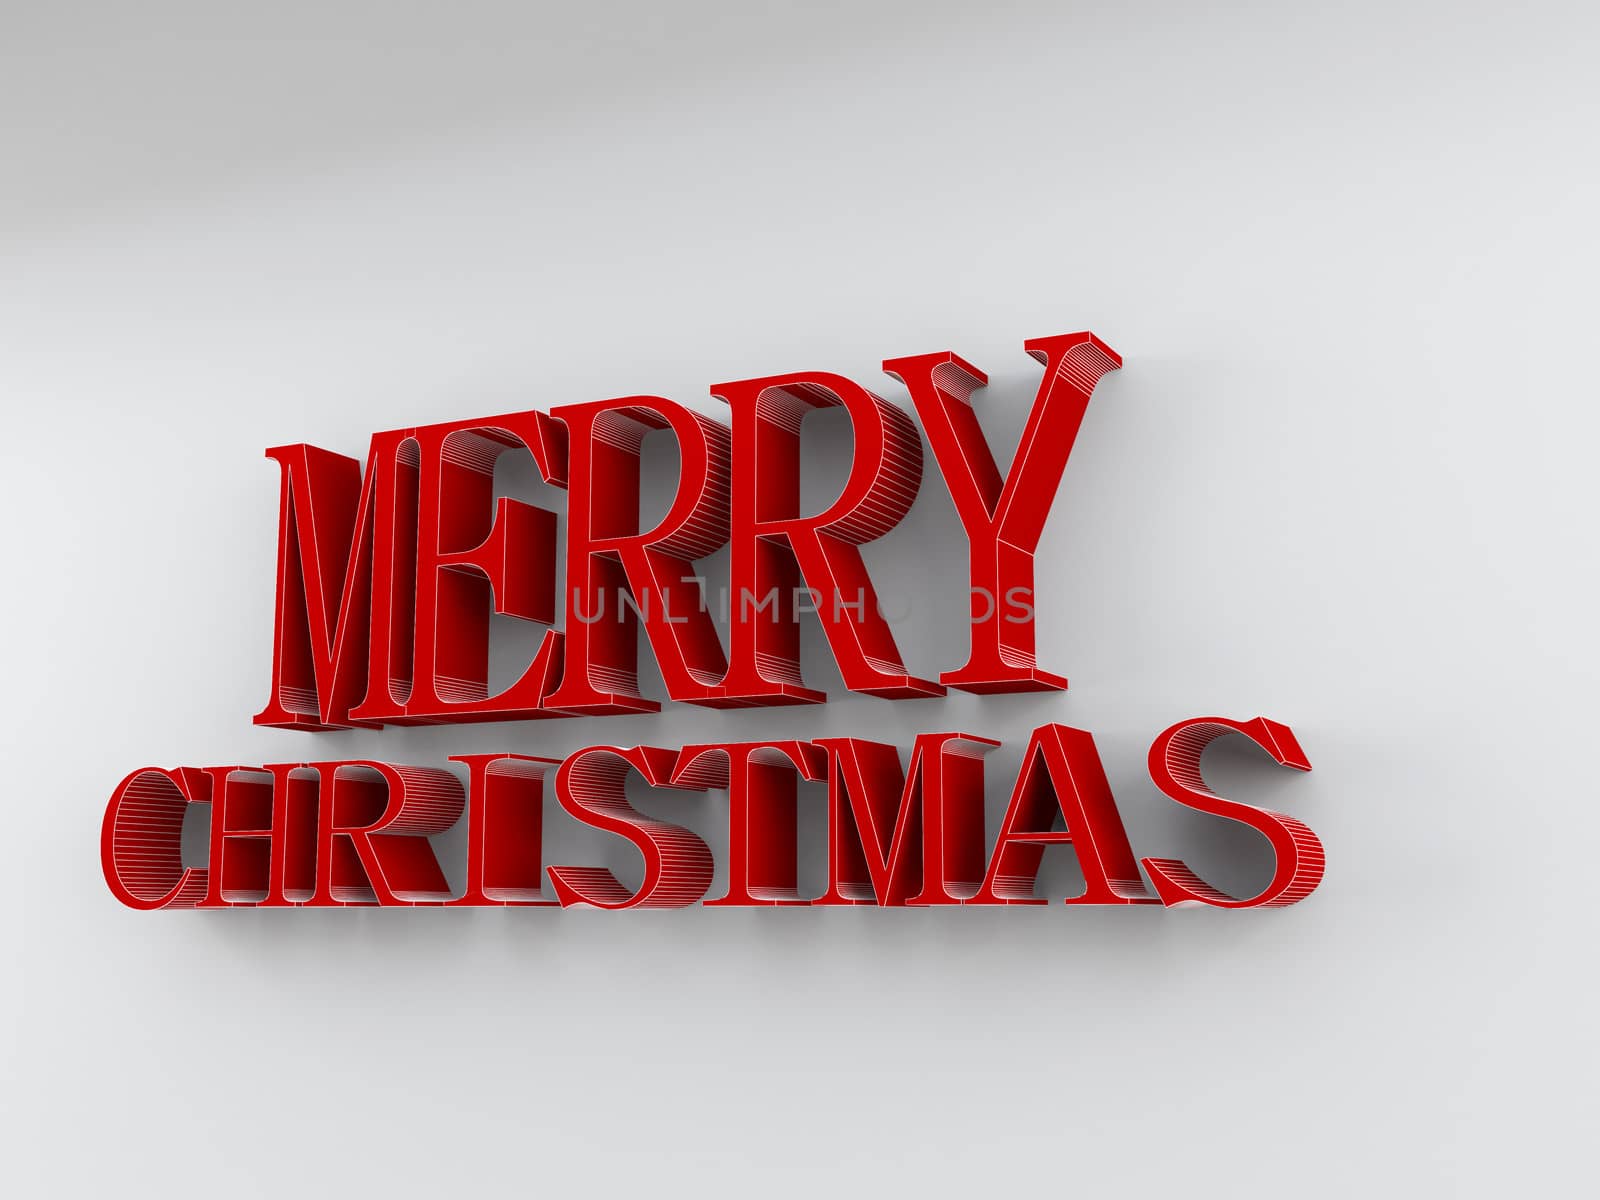 merry christmas in red over white background